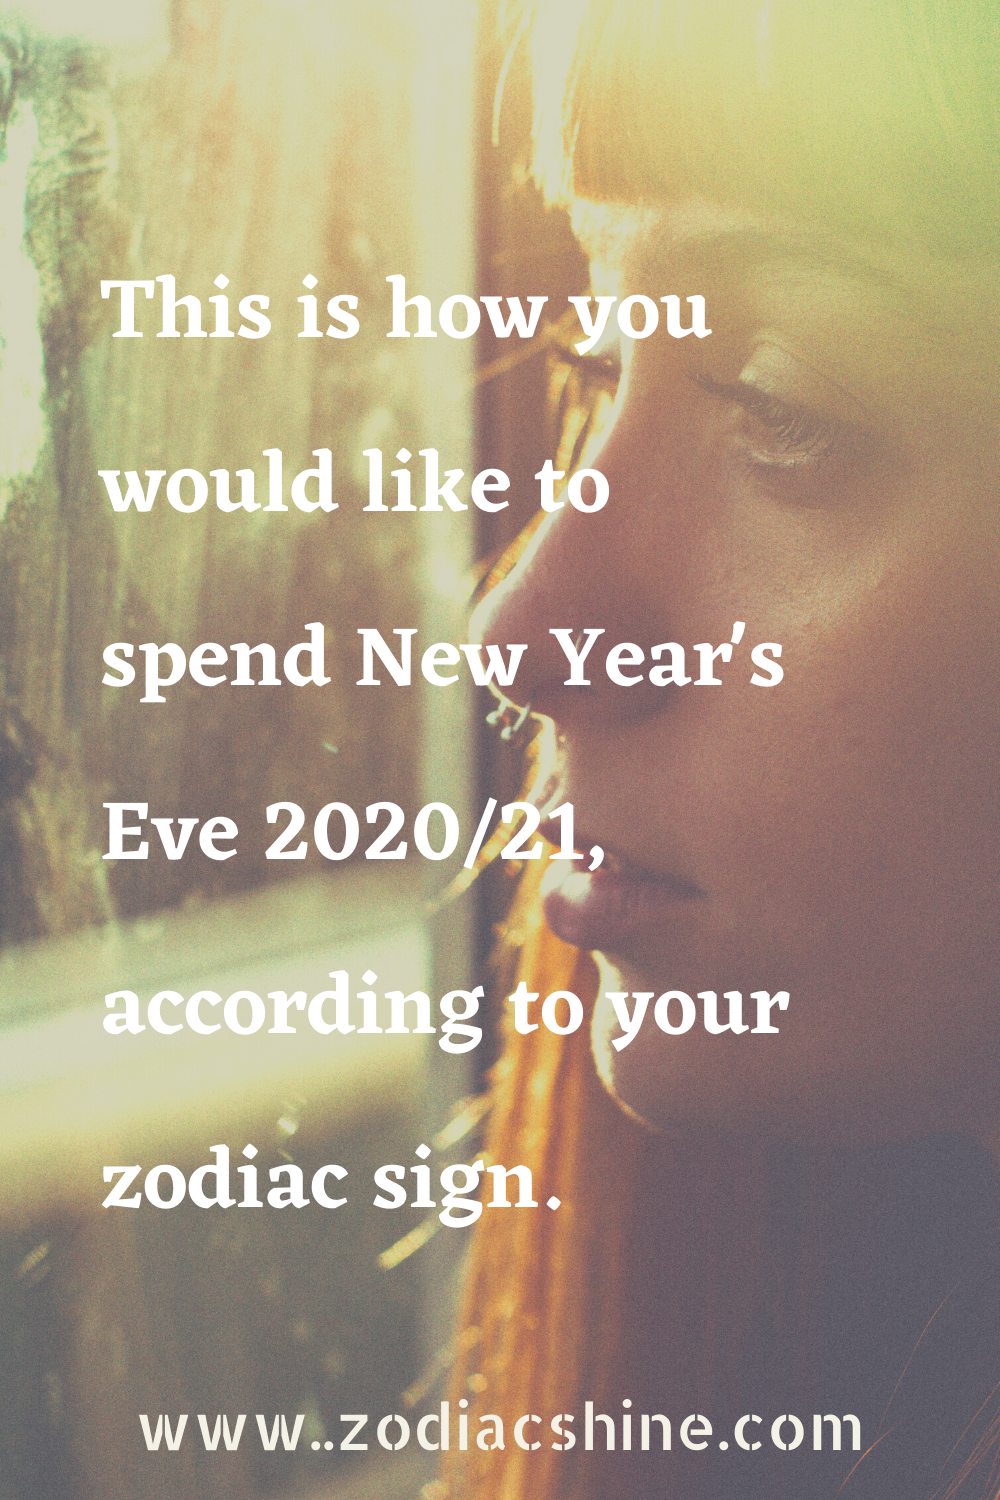 This is how you would like to spend New Year's Eve 2020/21, according to your zodiac sign.